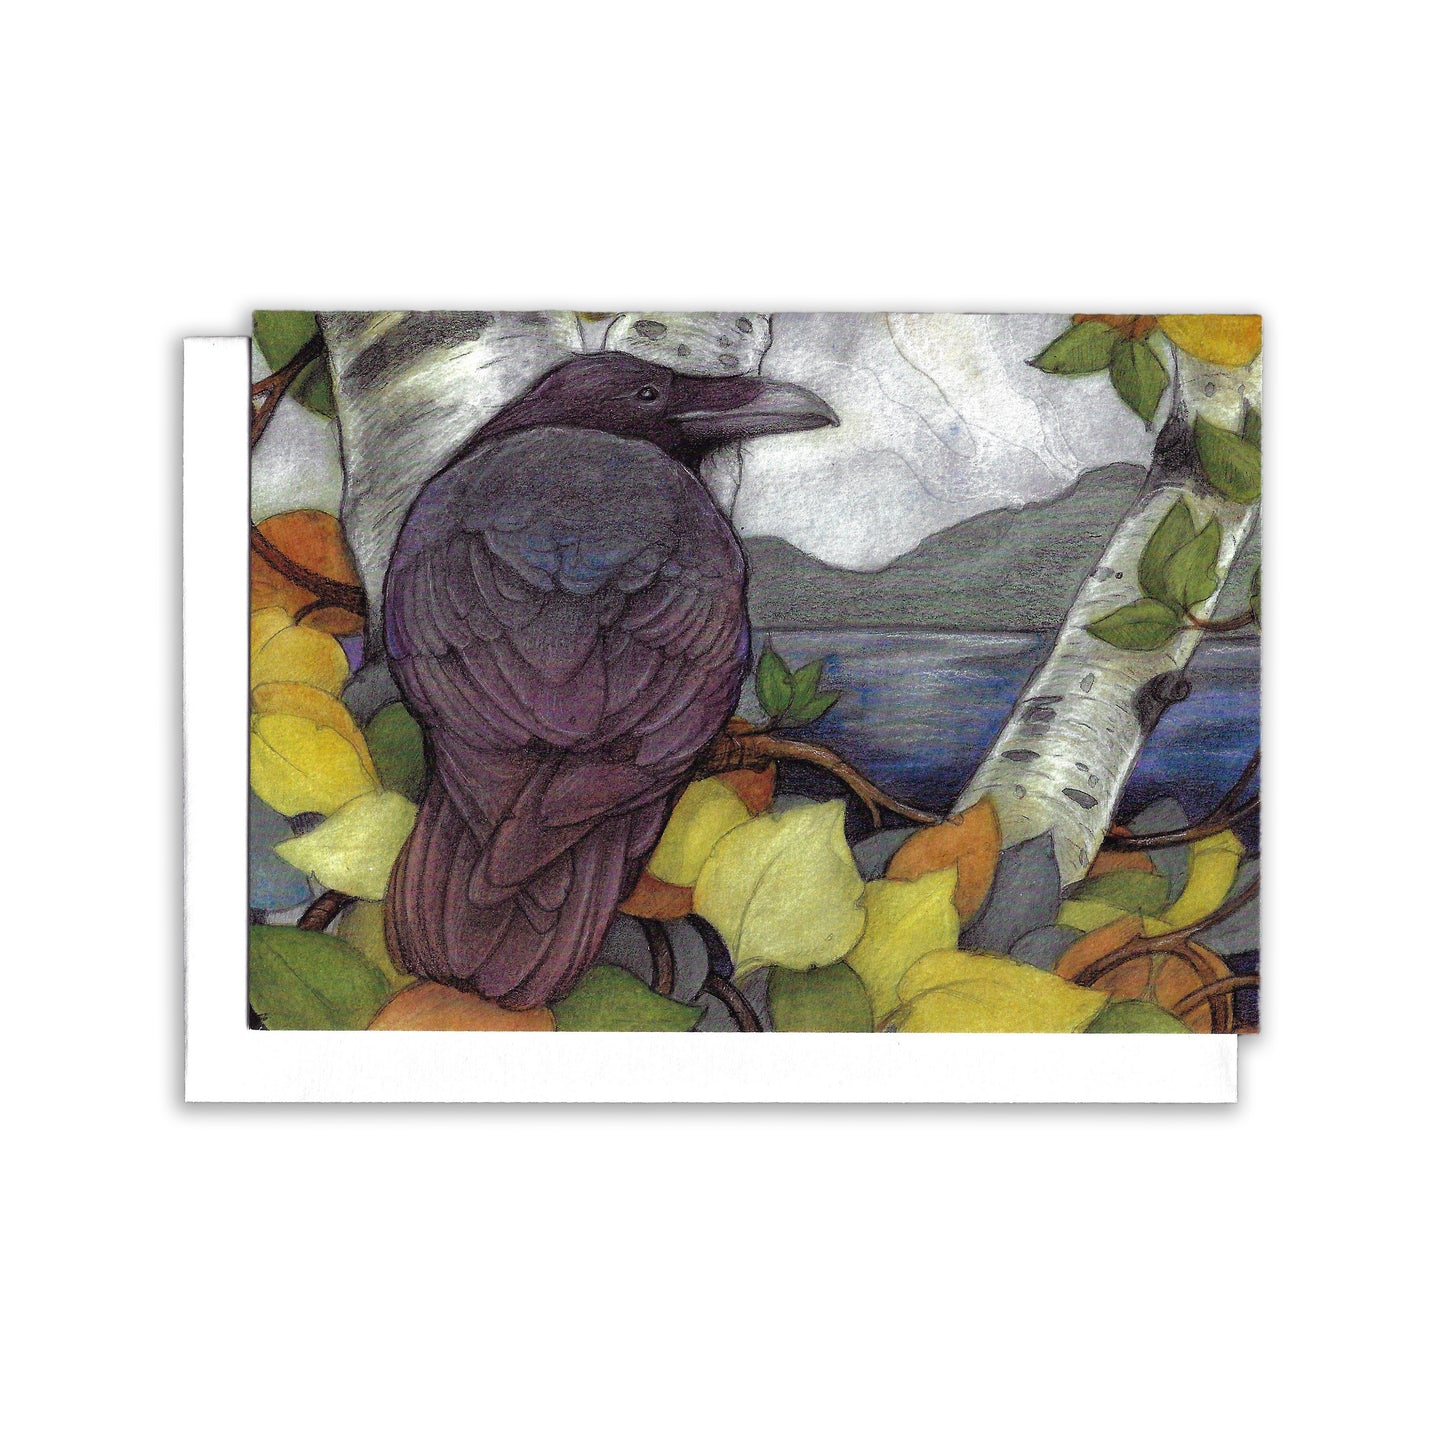 Raven's View-Greeting Card